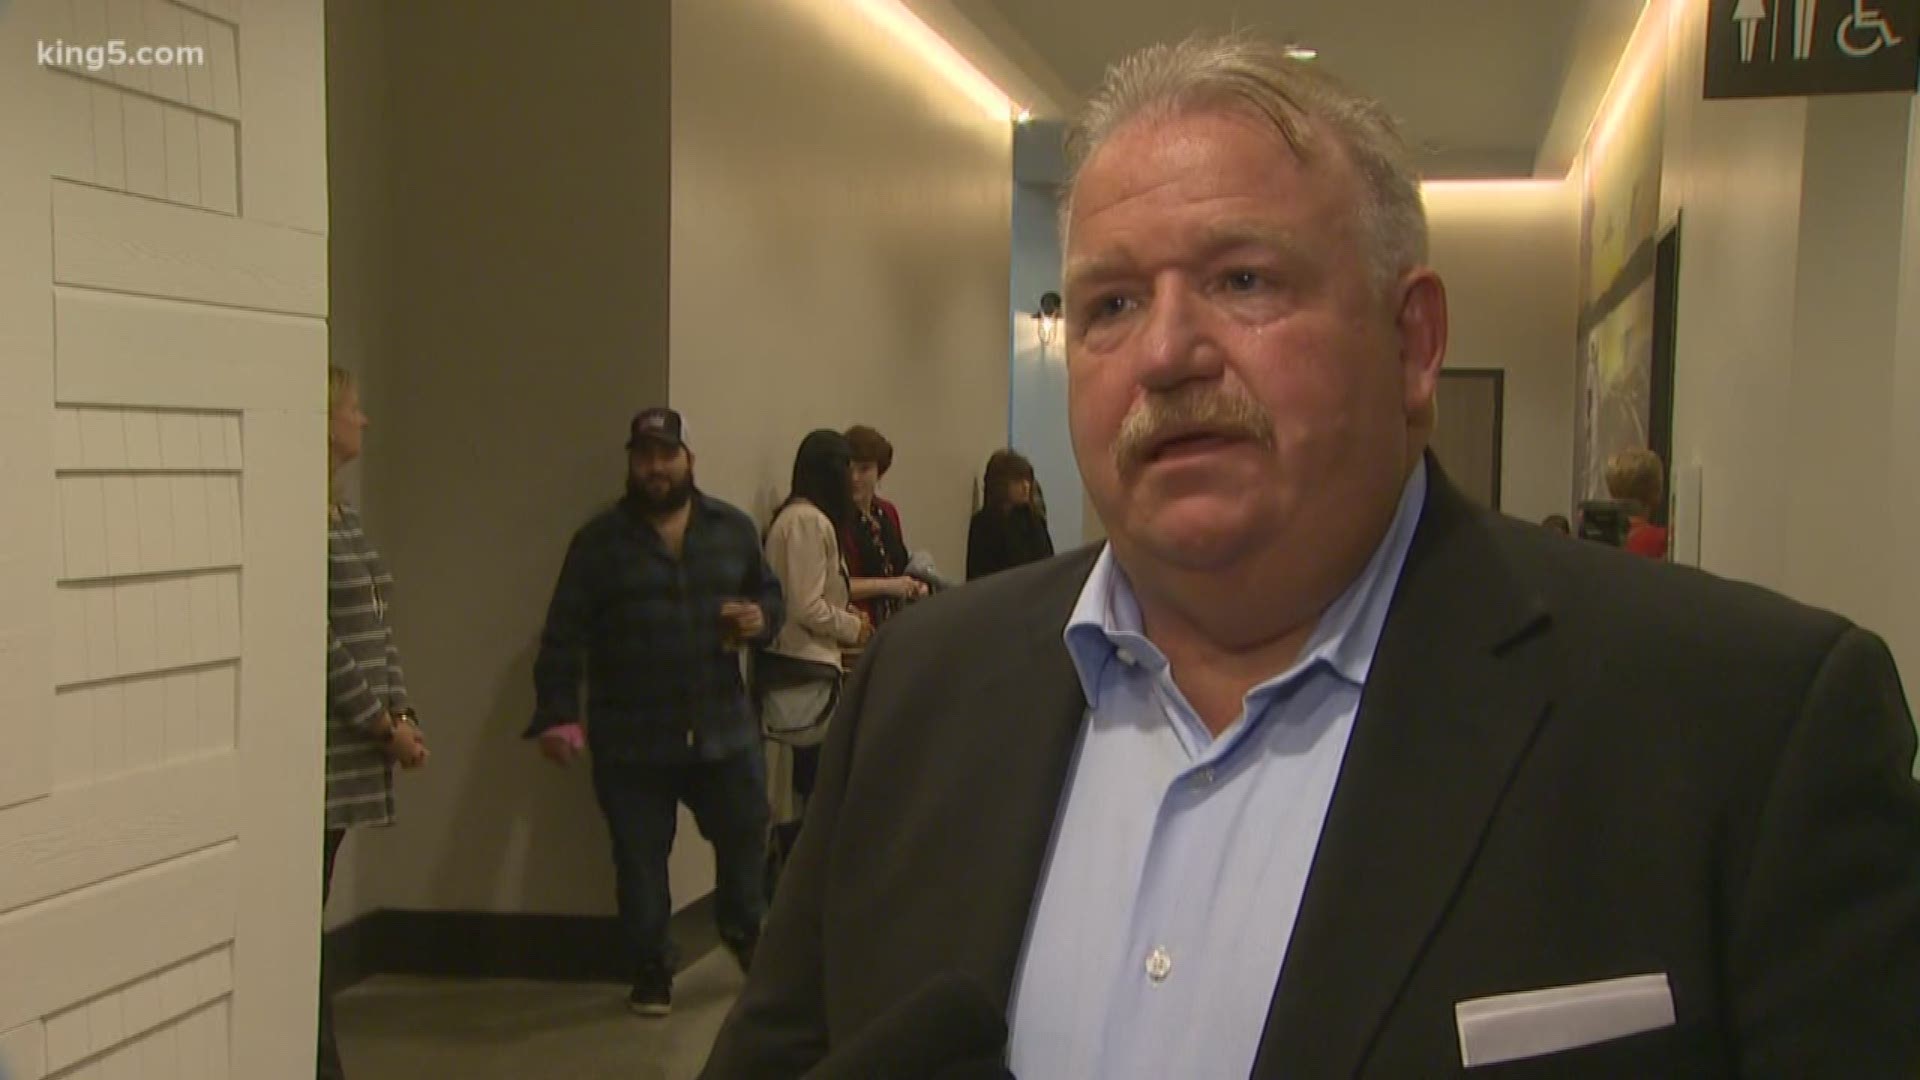 Snohomish County sheriff concedes election before results drop on